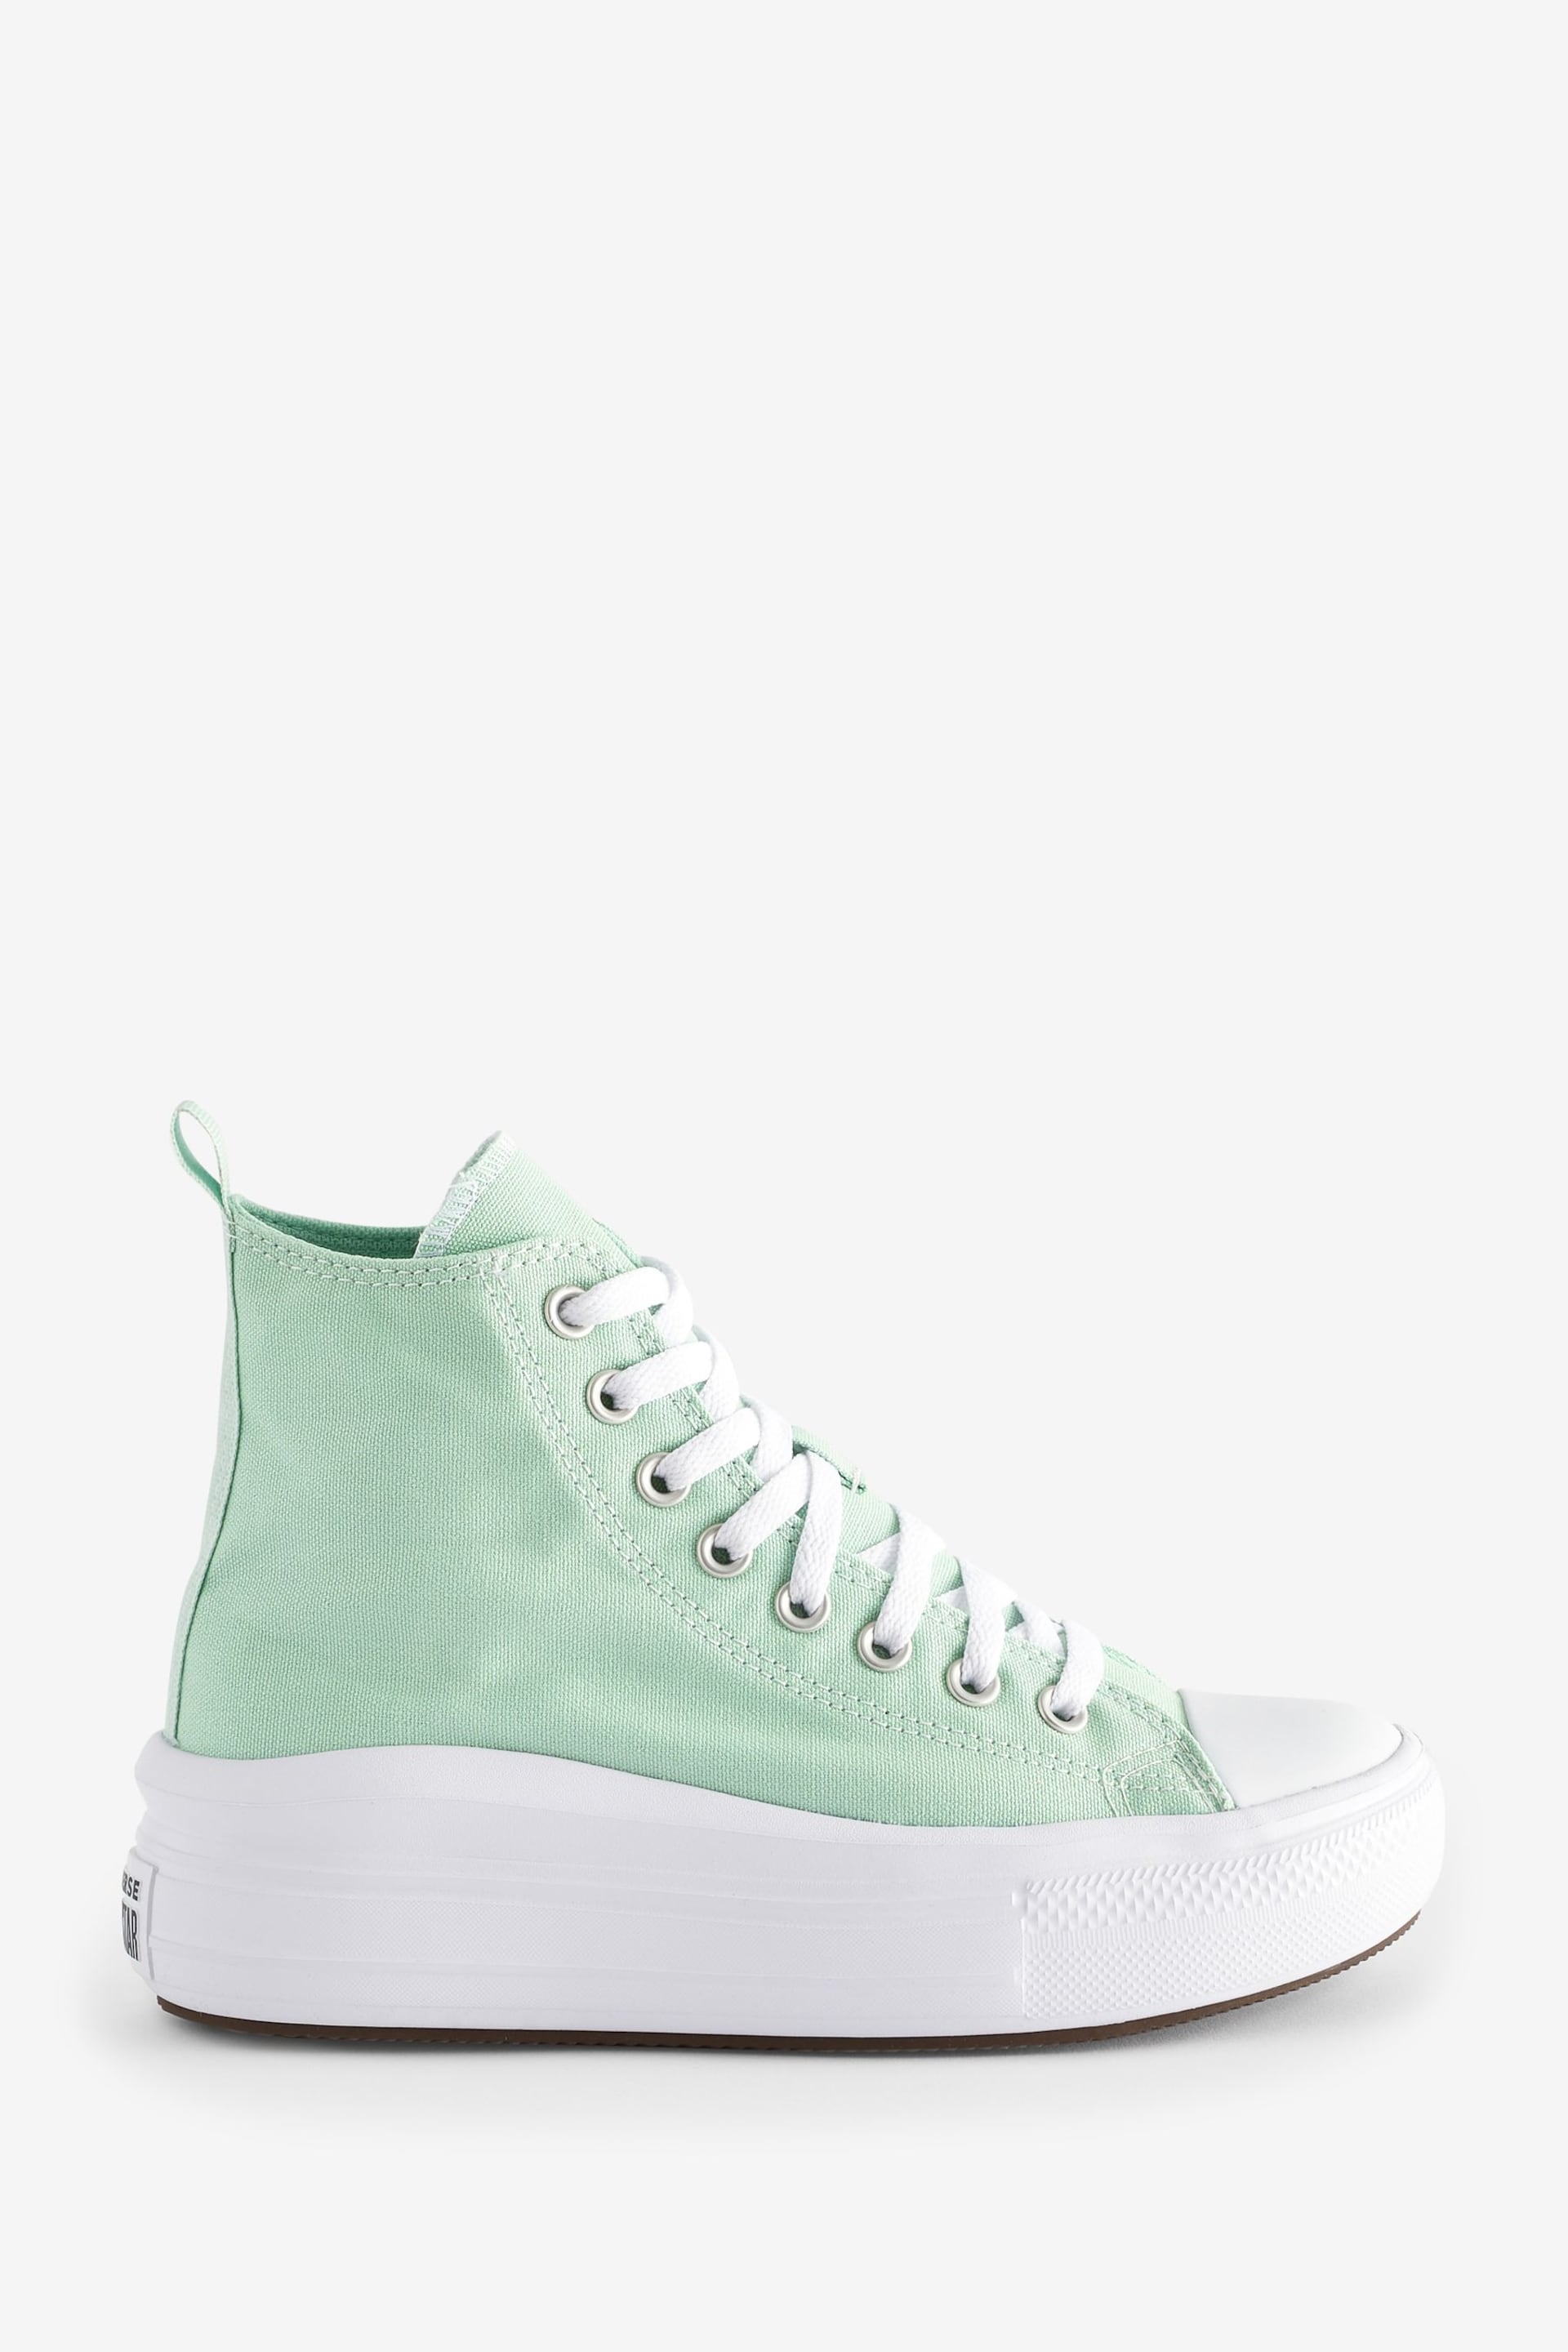 Converse Green Junior Chuck Taylor Move Trainers - Image 1 of 8